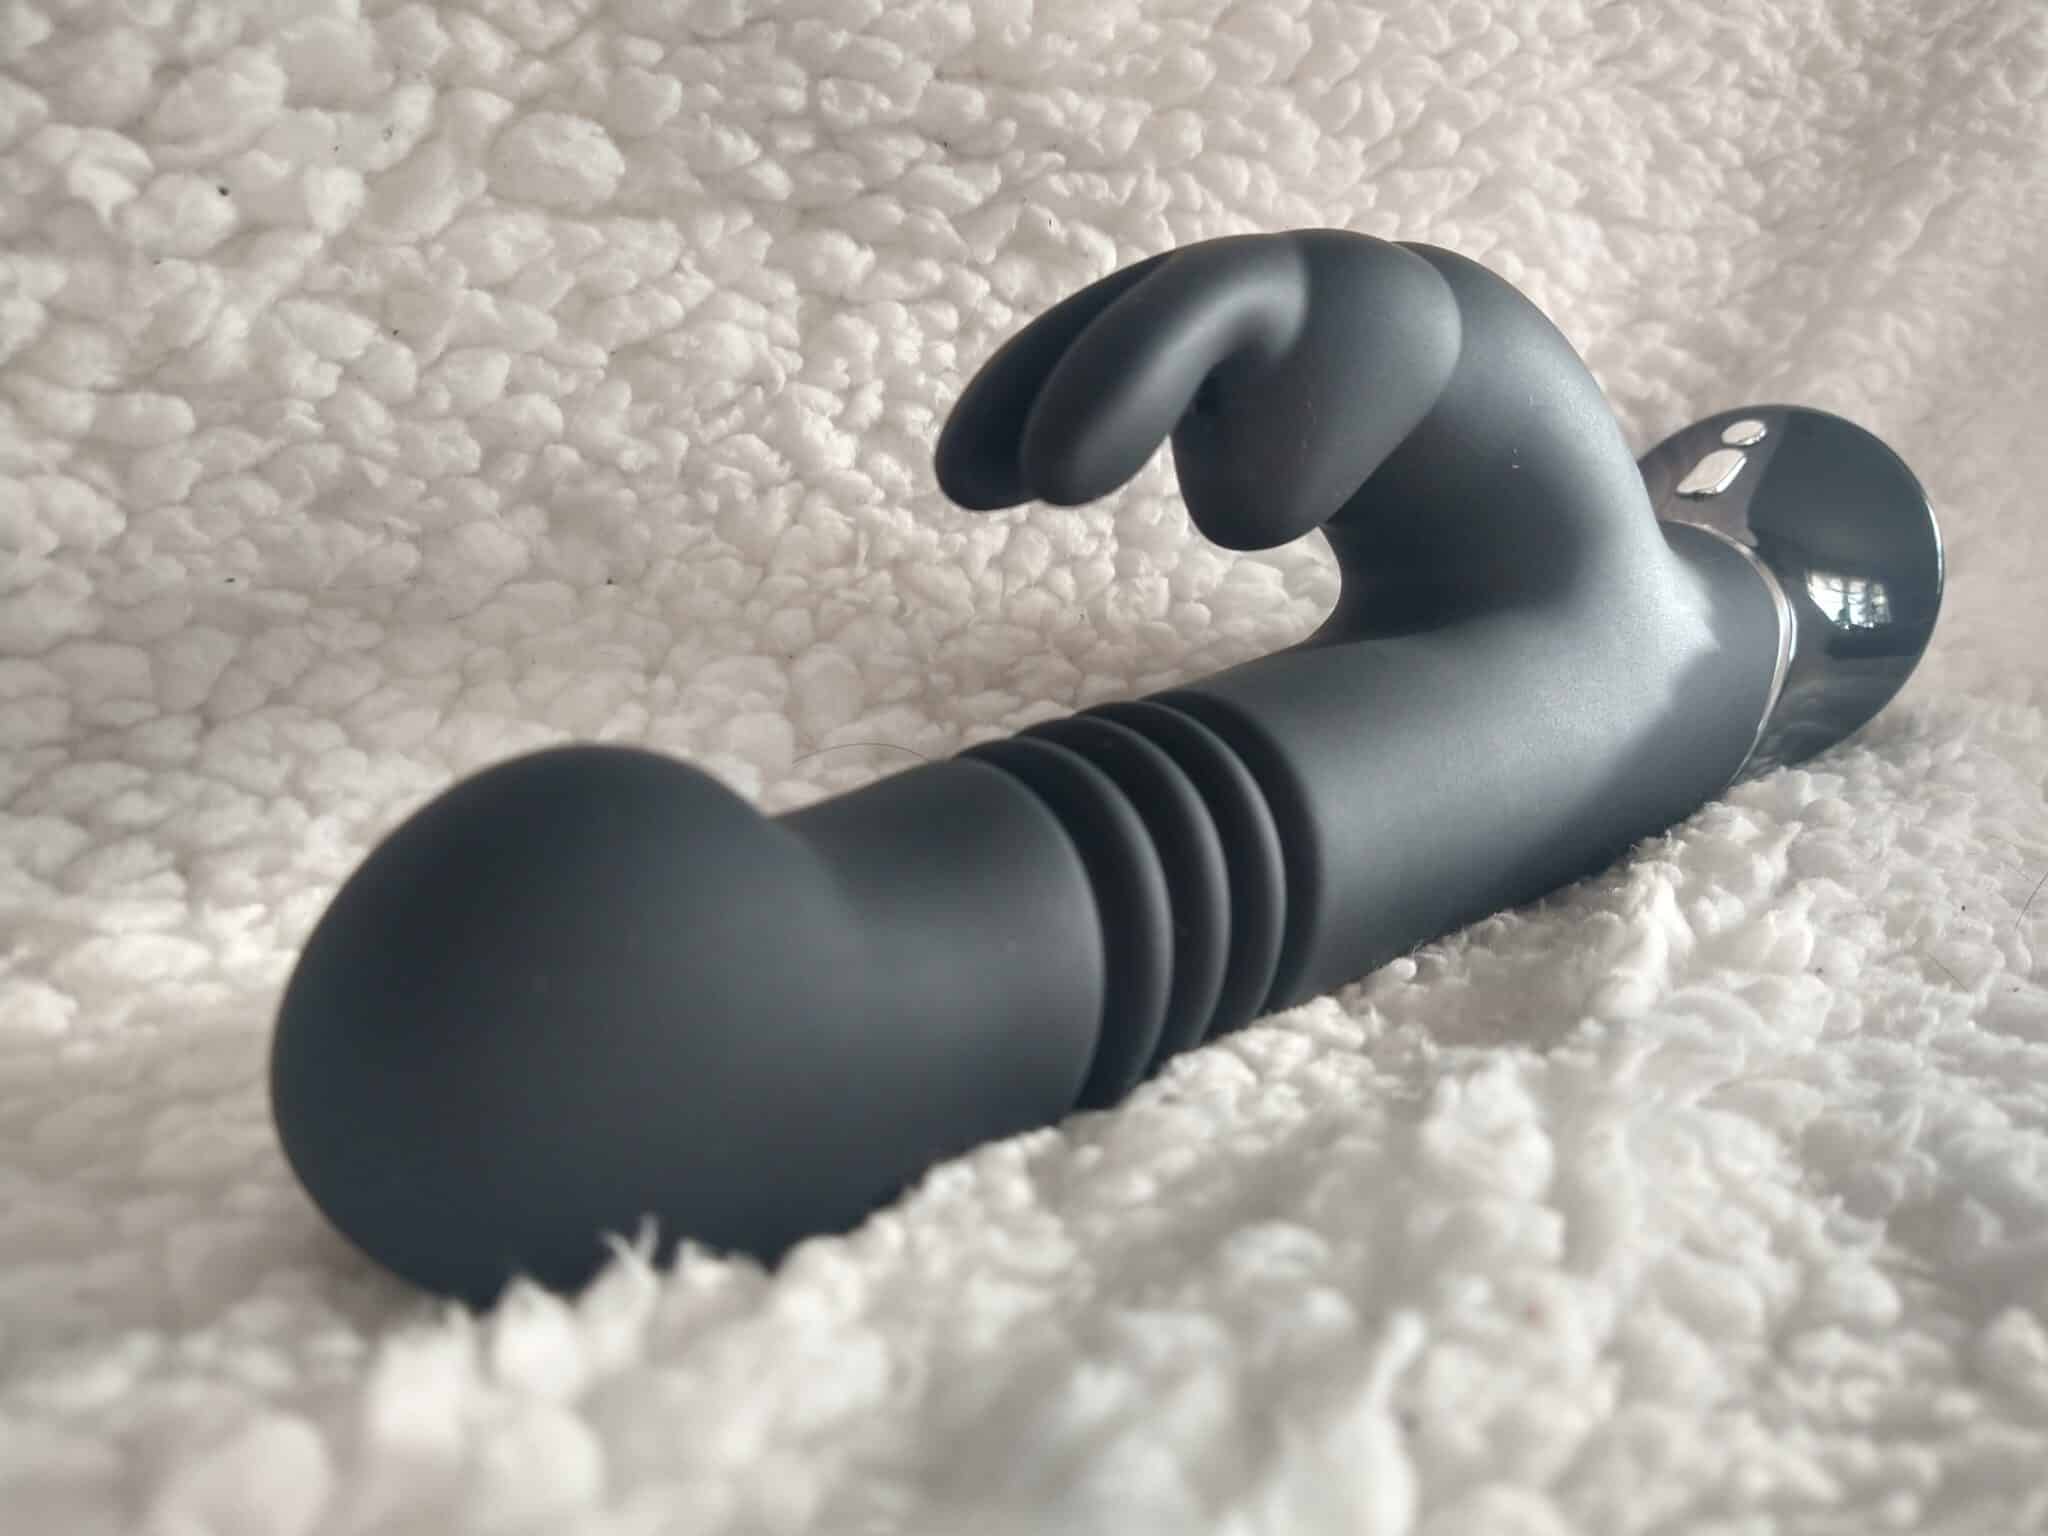 Fifty Shades of Grey Greedy Girl Thrusting Rabbit Vibrator The Design: A Closer Look